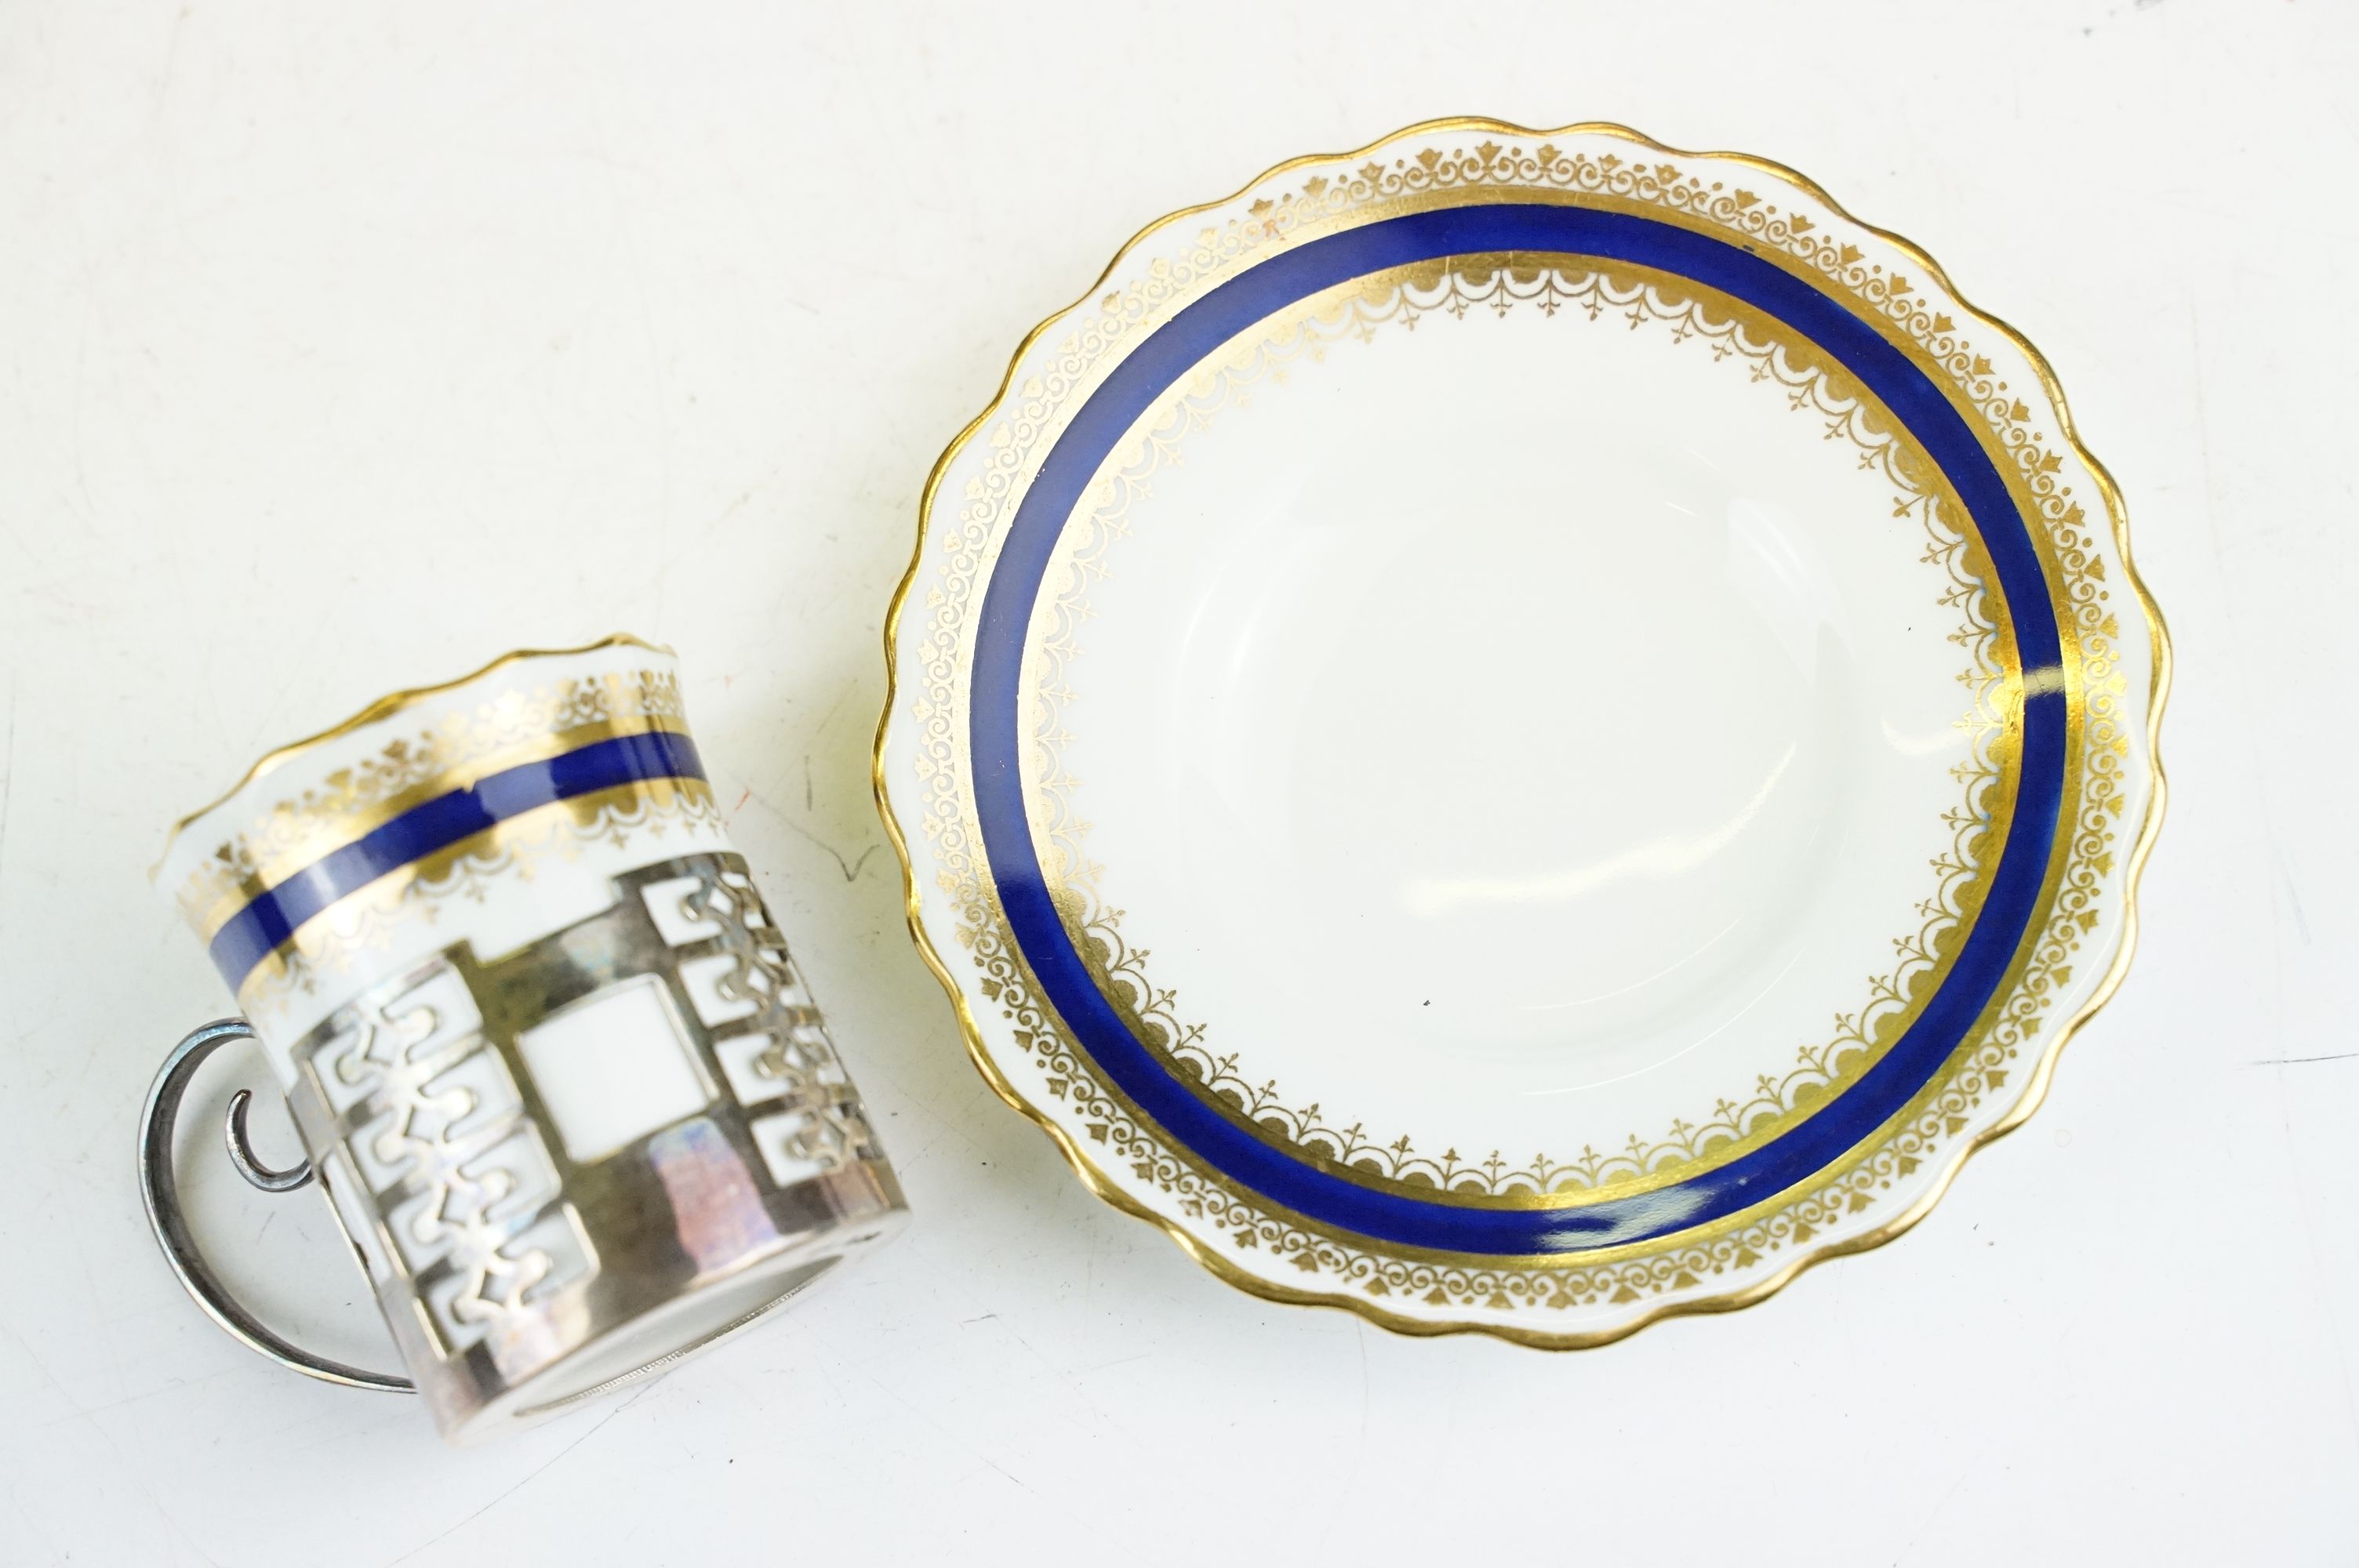 Early 20th century cased set of six Aynsley coffee cups & saucers with cobalt blue & gilt - Image 4 of 10